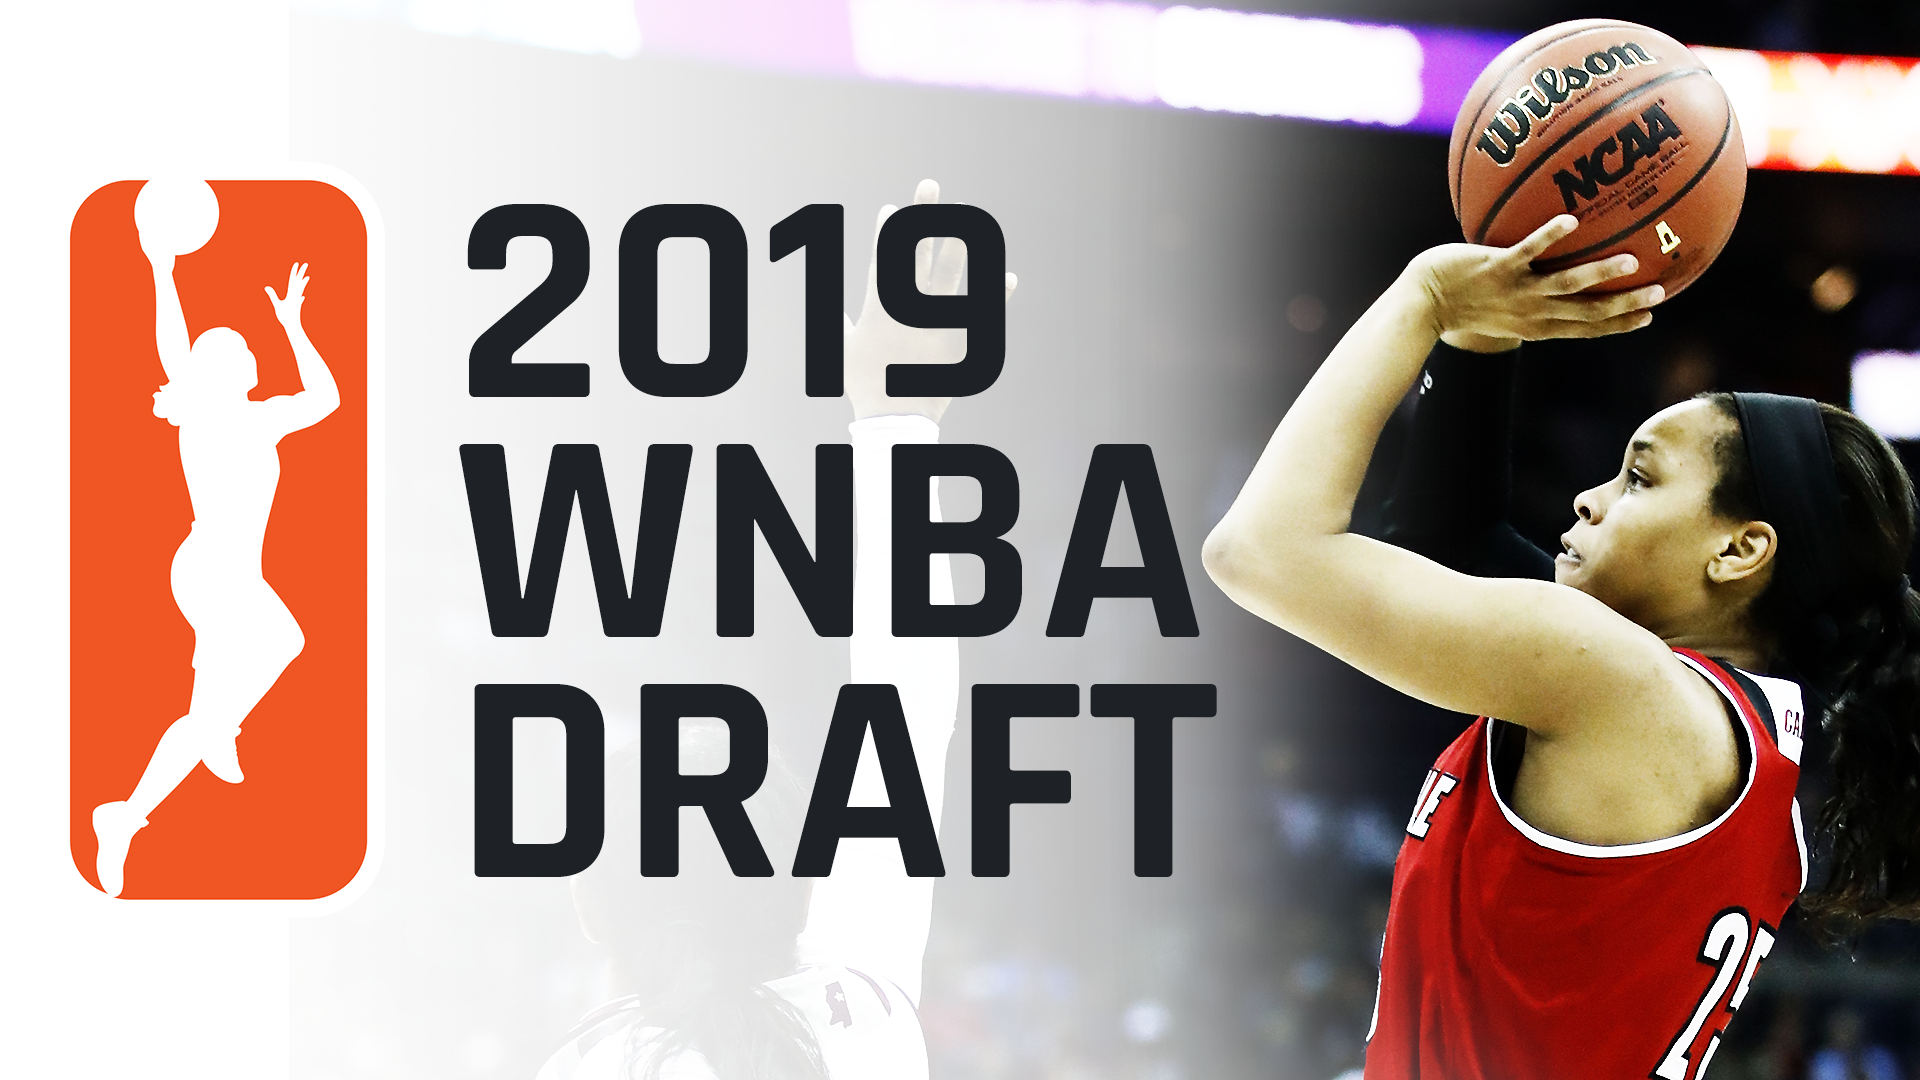 WNBA Draft 2019 Date, time, order of picks, top prospects and how to